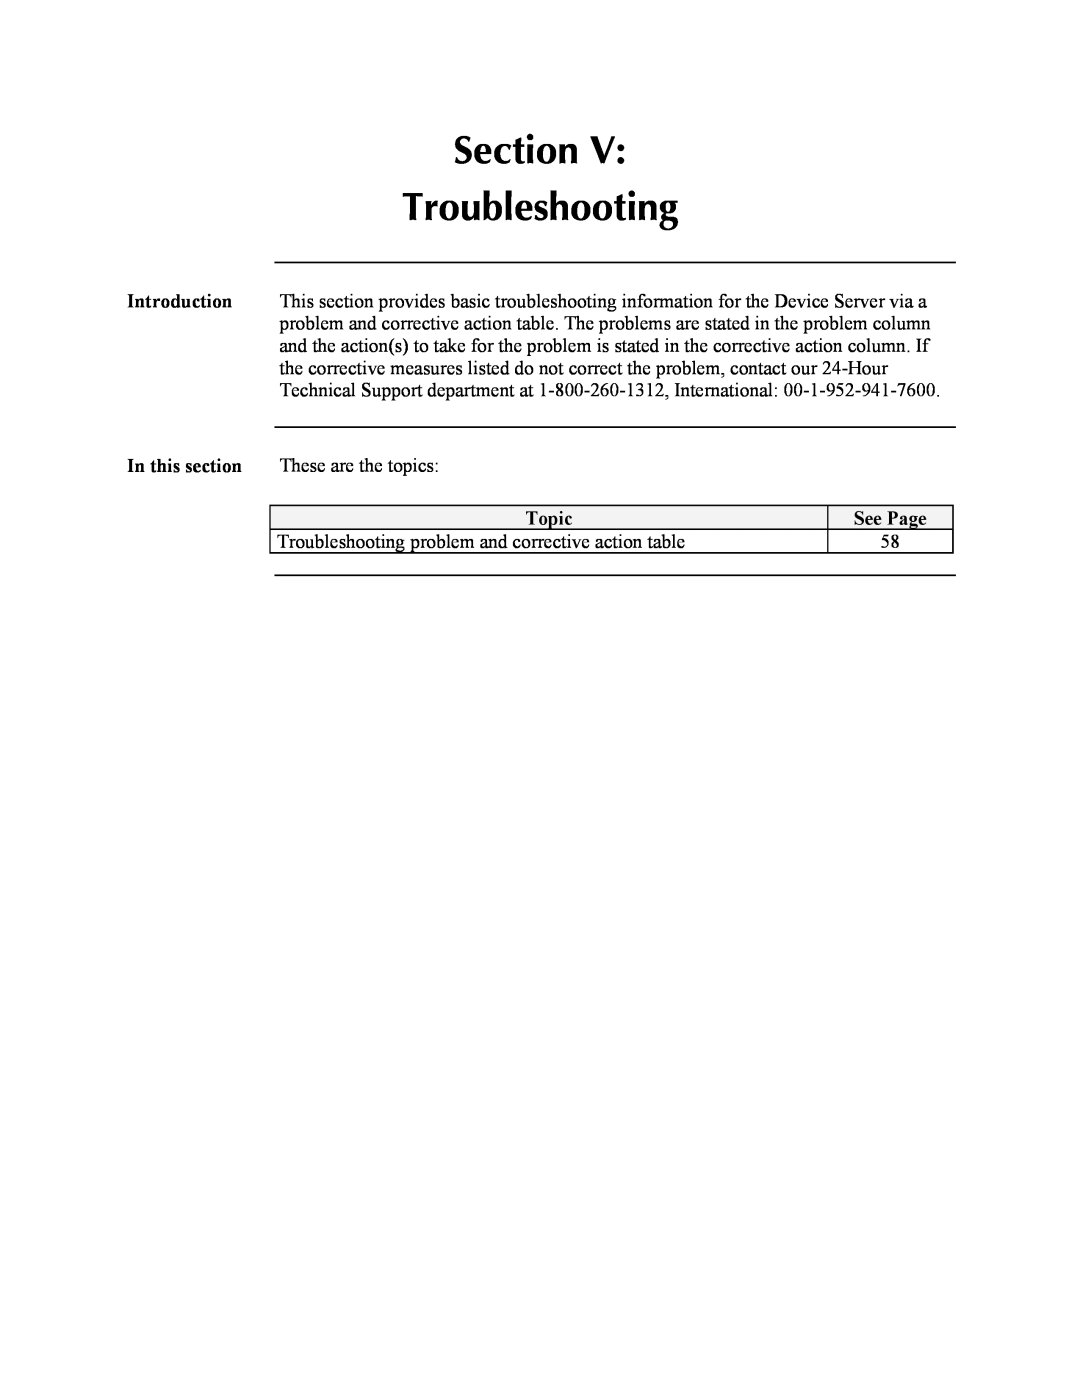 Transition Networks SDSFE31XX-100, RS-232-TO-100BASE-FX Section, Troubleshooting, Introduction, In this section, Topic 